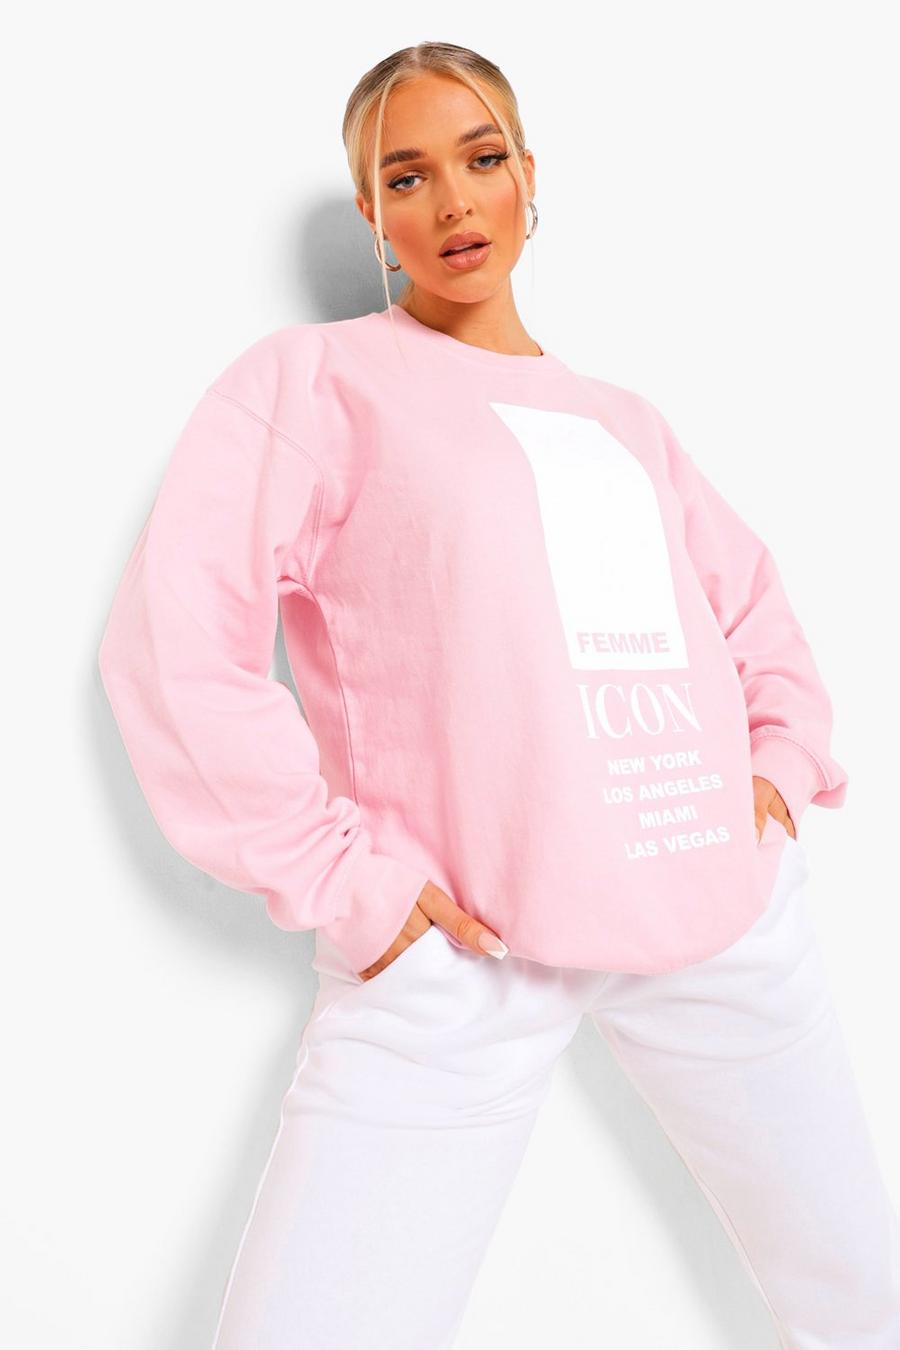 Petite - Sweat oversize "Femme Icon", Baby pink image number 1